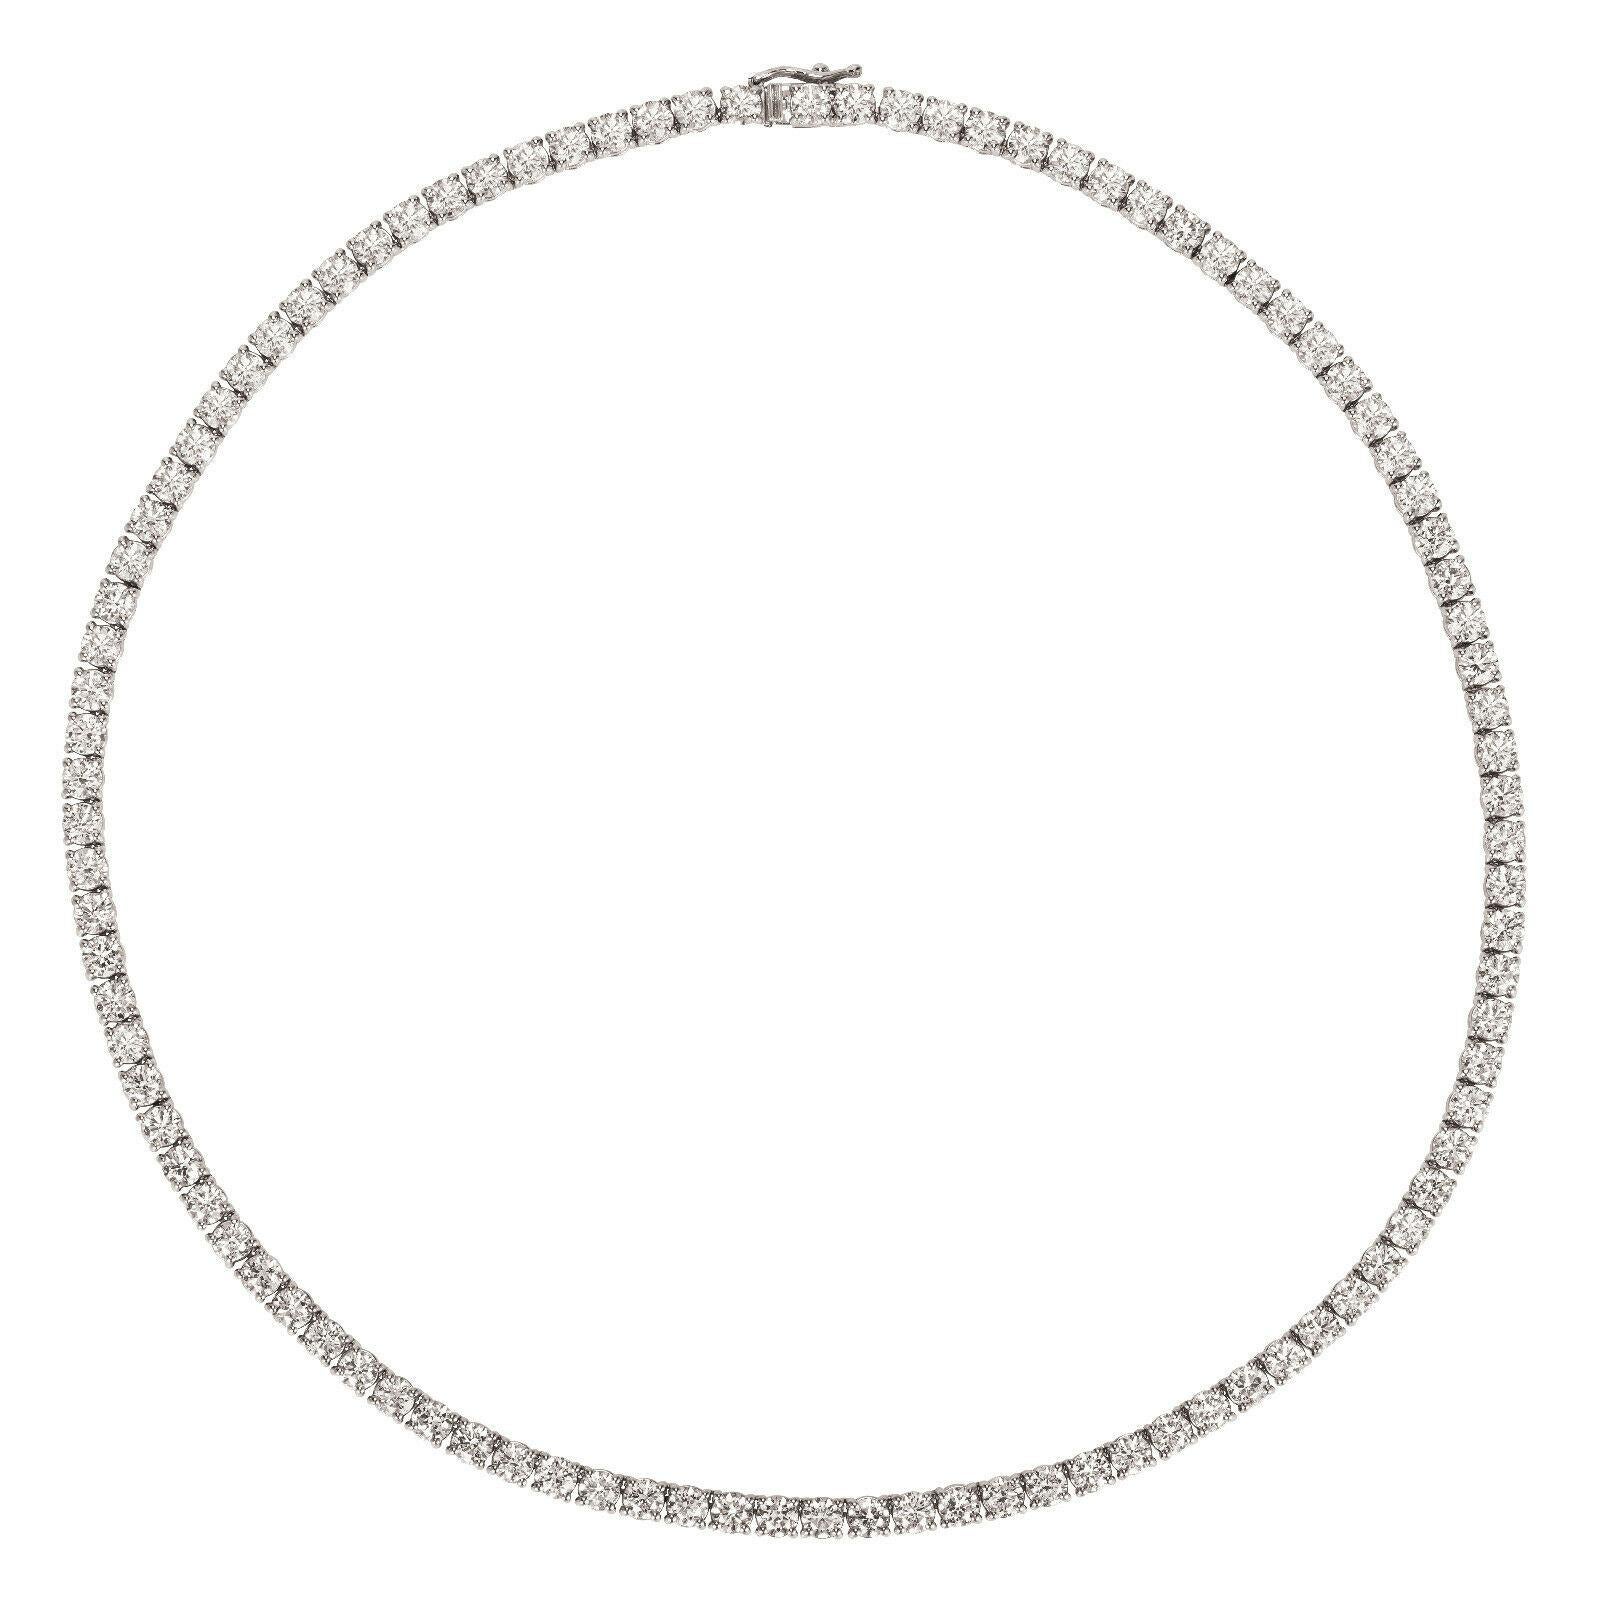 20.00 Carat Diamond Tennis Necklace G SI 14K White Gold 16 inches

100% Natural Diamonds, Not Enhanced in any way Round Cut Diamond  Necklace  
20.00CT
G-H 
SI  
14K White Gold, Pave,  23.8 gram
16 inches in length, 1/8 inch in width
99